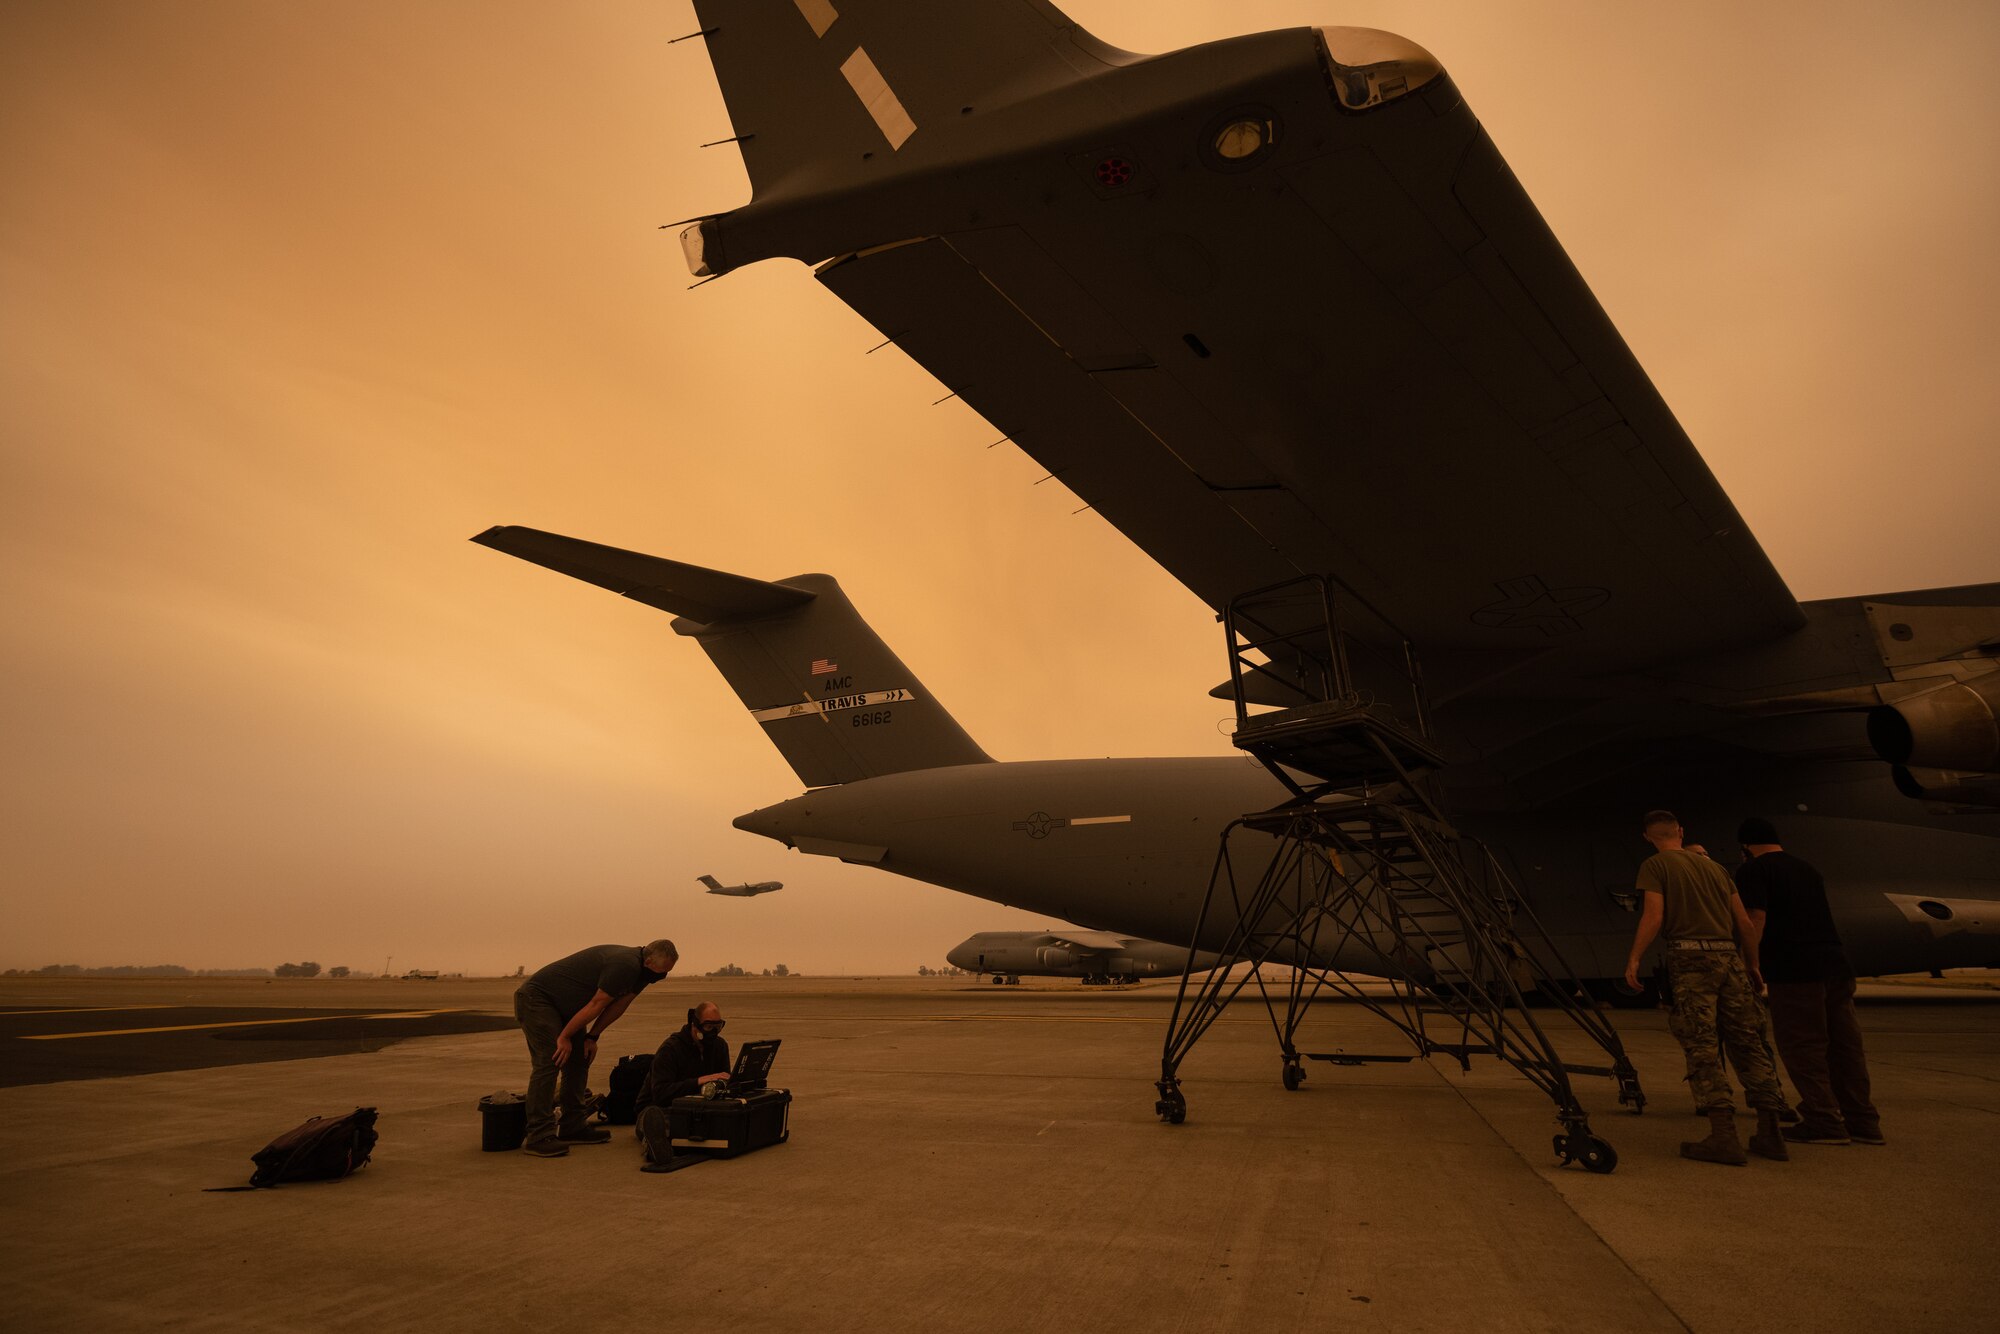 Airmen work on a wing of a C-17 while another C-17 takes off in the background.